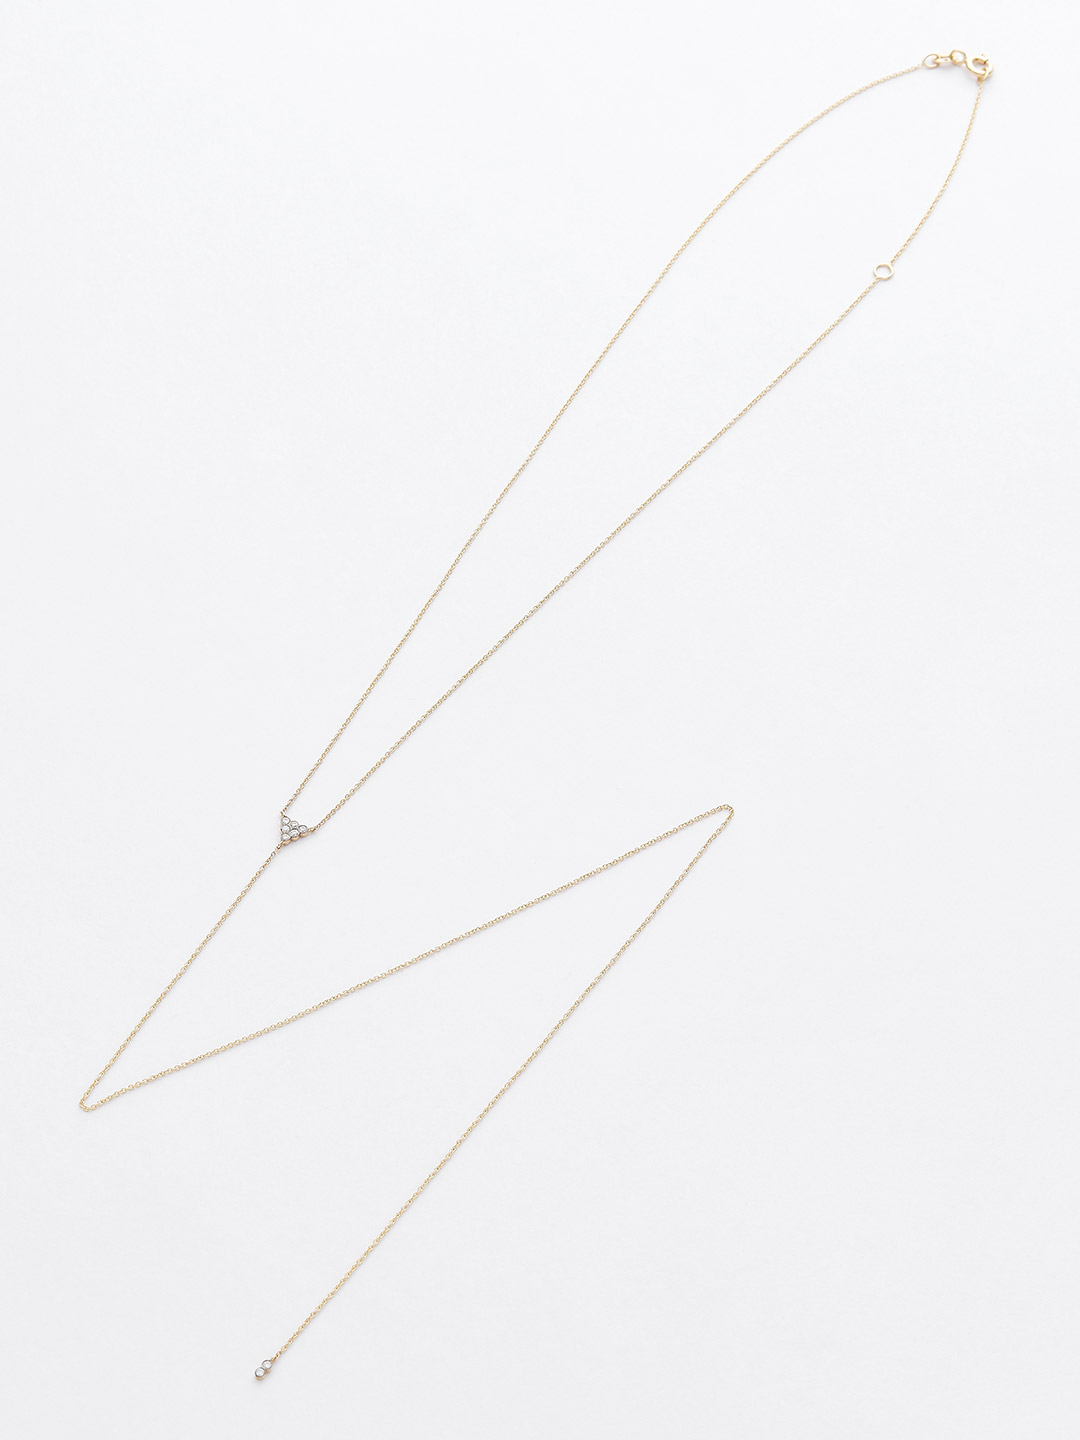 Diamond Y Necklace - 18K Yellow Gold